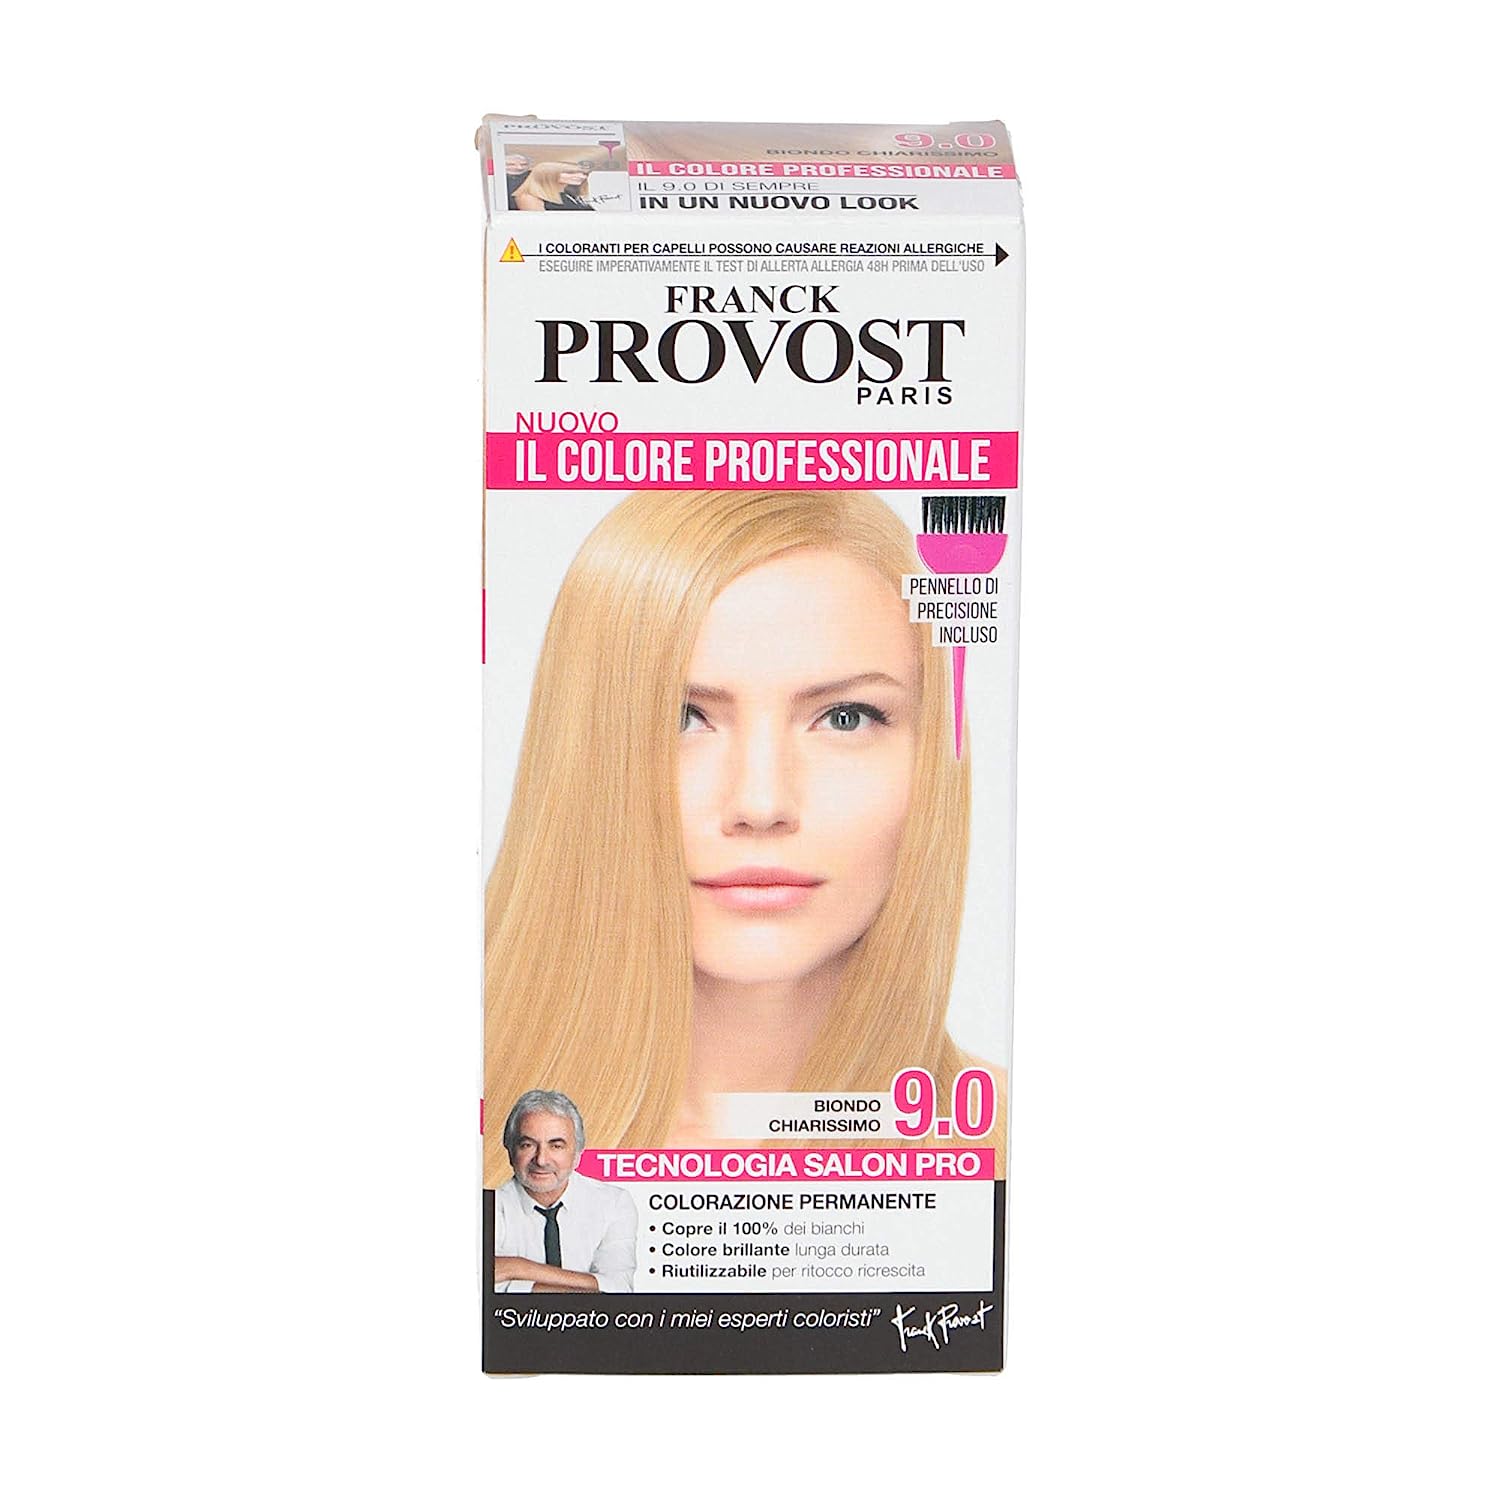 Franck Provost Professional Hair Color at Home - Improves Reflection and Shine - Light Blonde